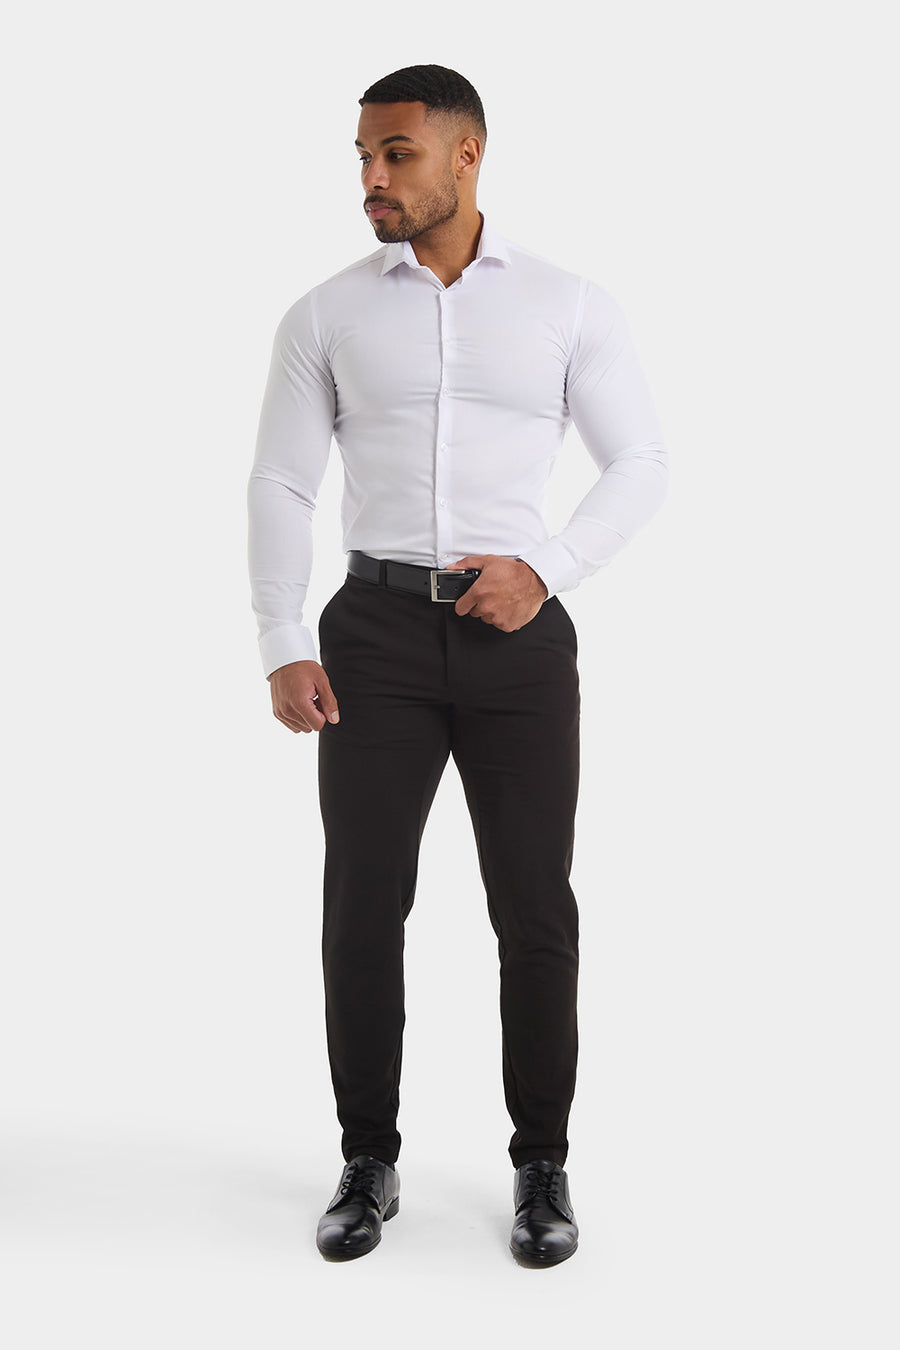 Athletic Fit Dress Shirt in Black - TAILORED ATHLETE - USA